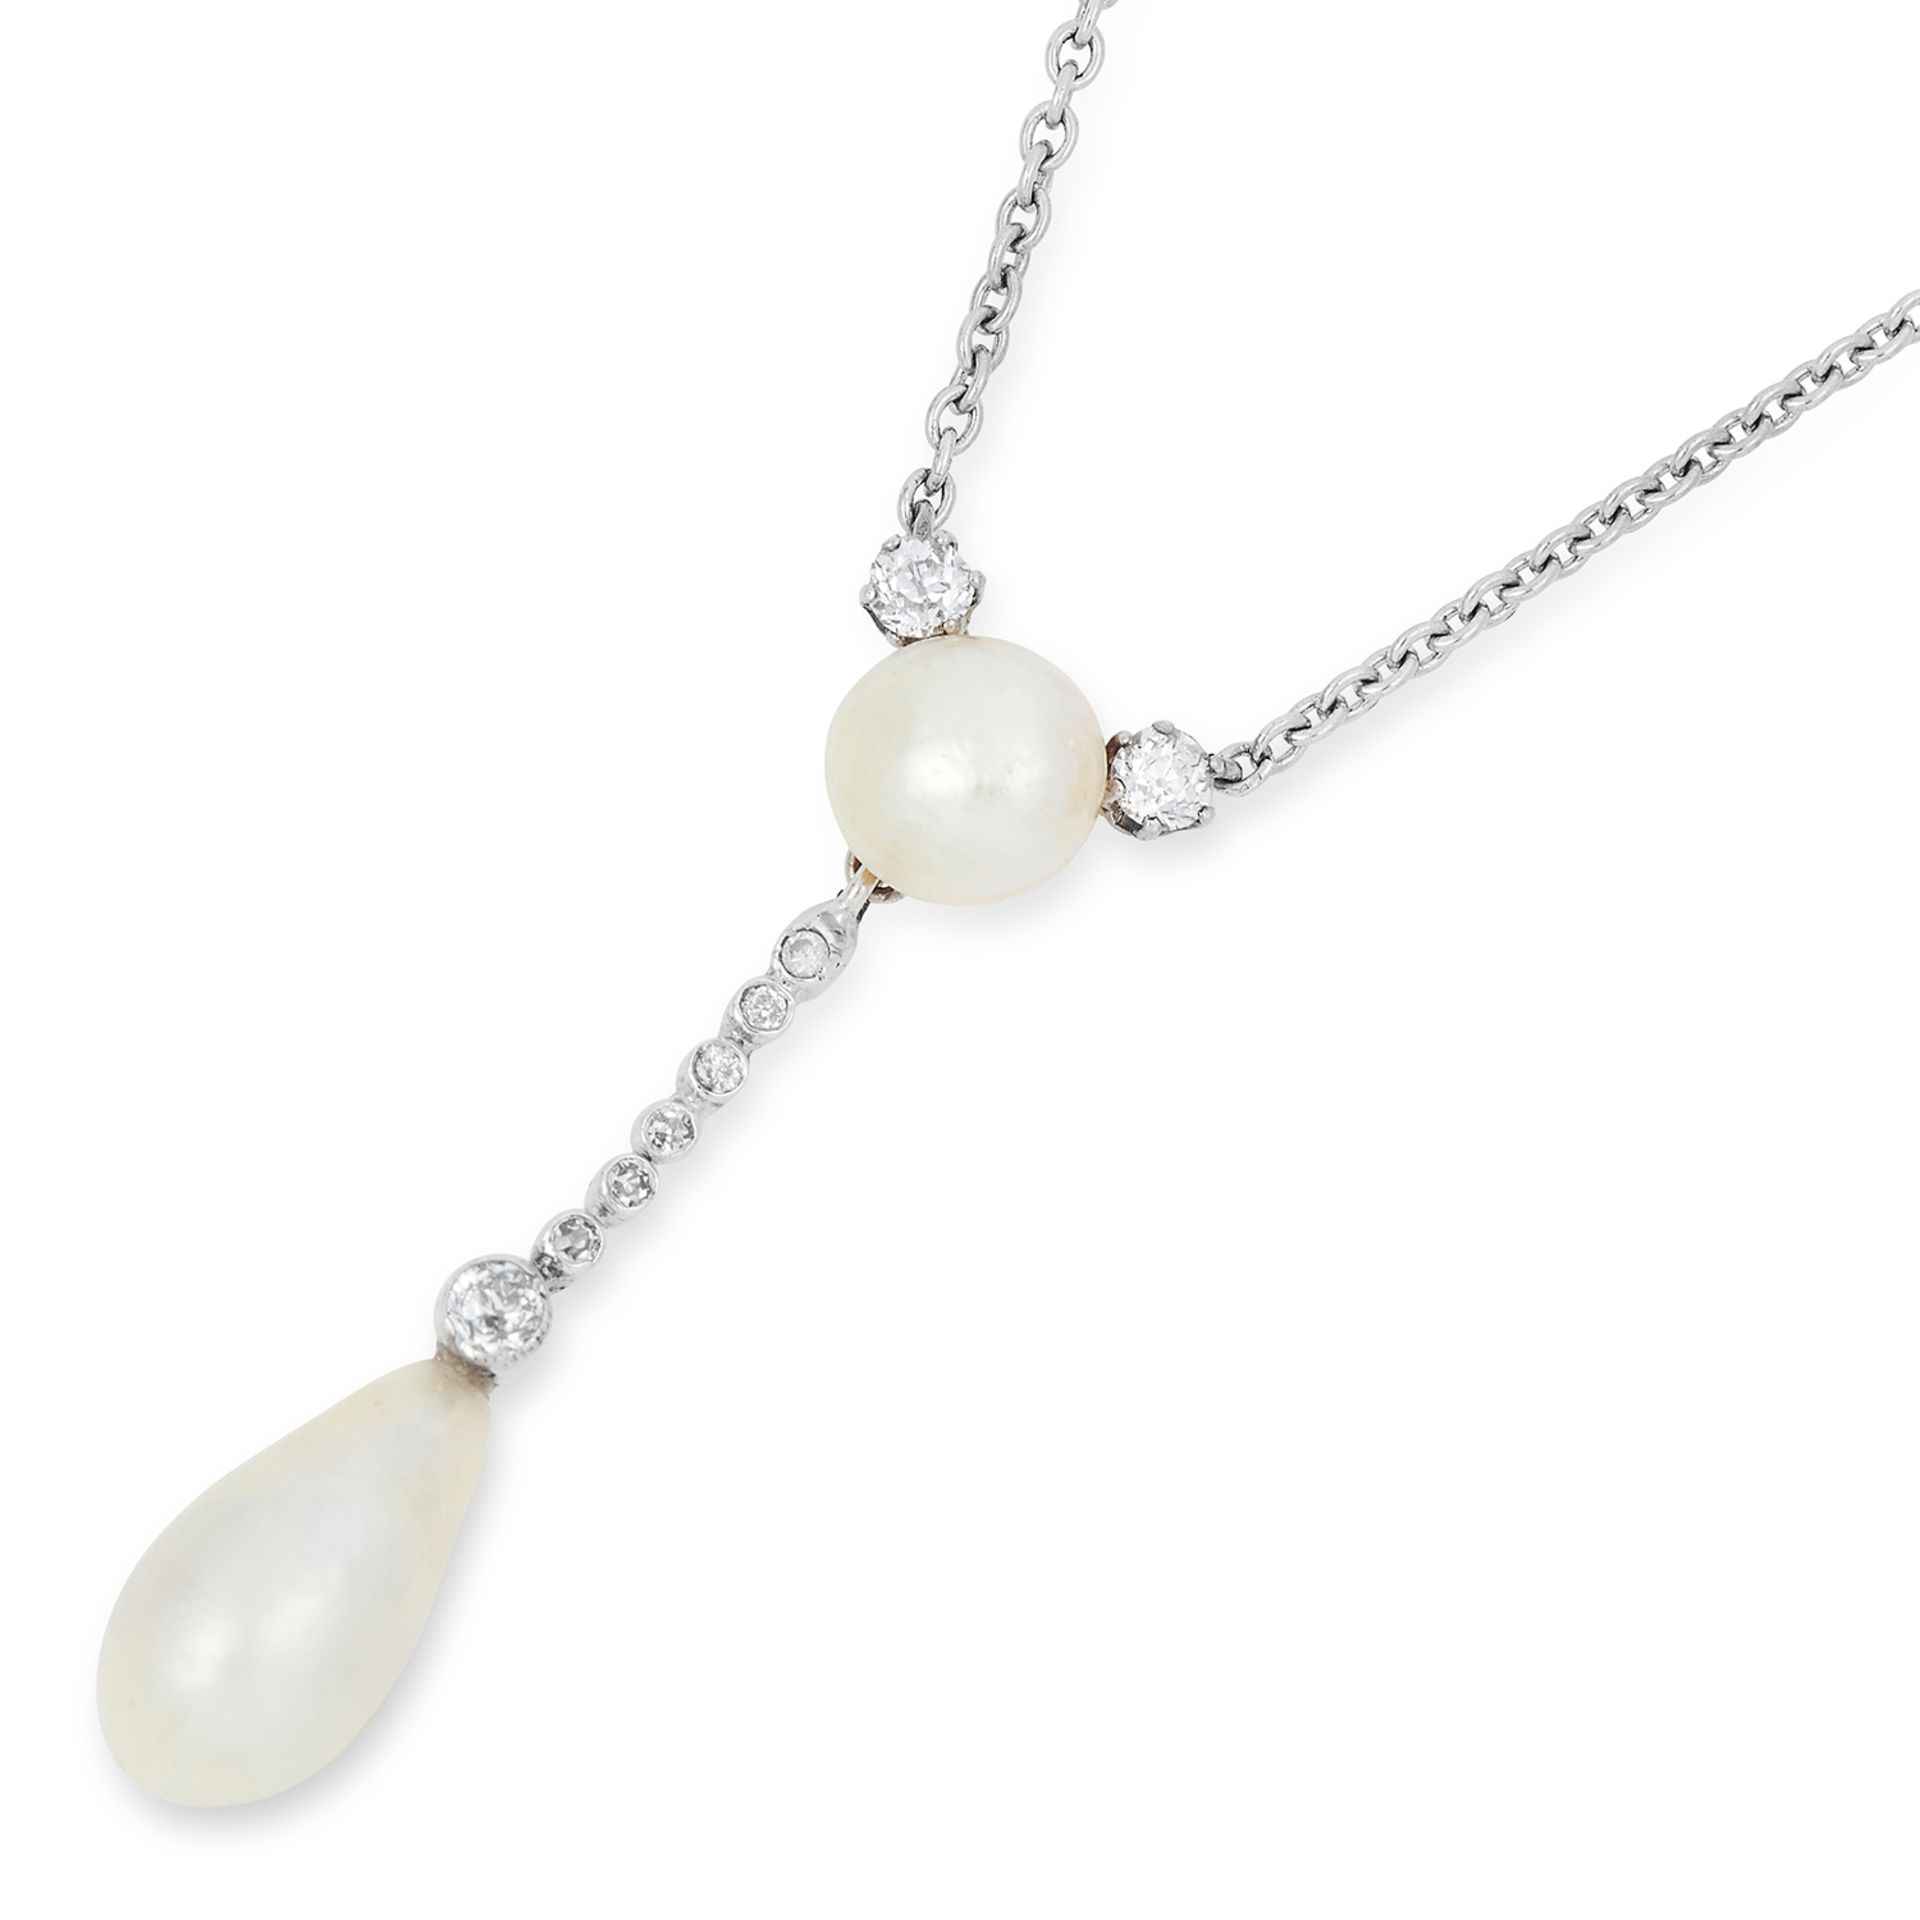 ANTIQUE NATURAL PEARL AND DIAMOND PENDANT NECKLACE, EARLY 20TH CENTURY set with a pearl of 7.3mm,